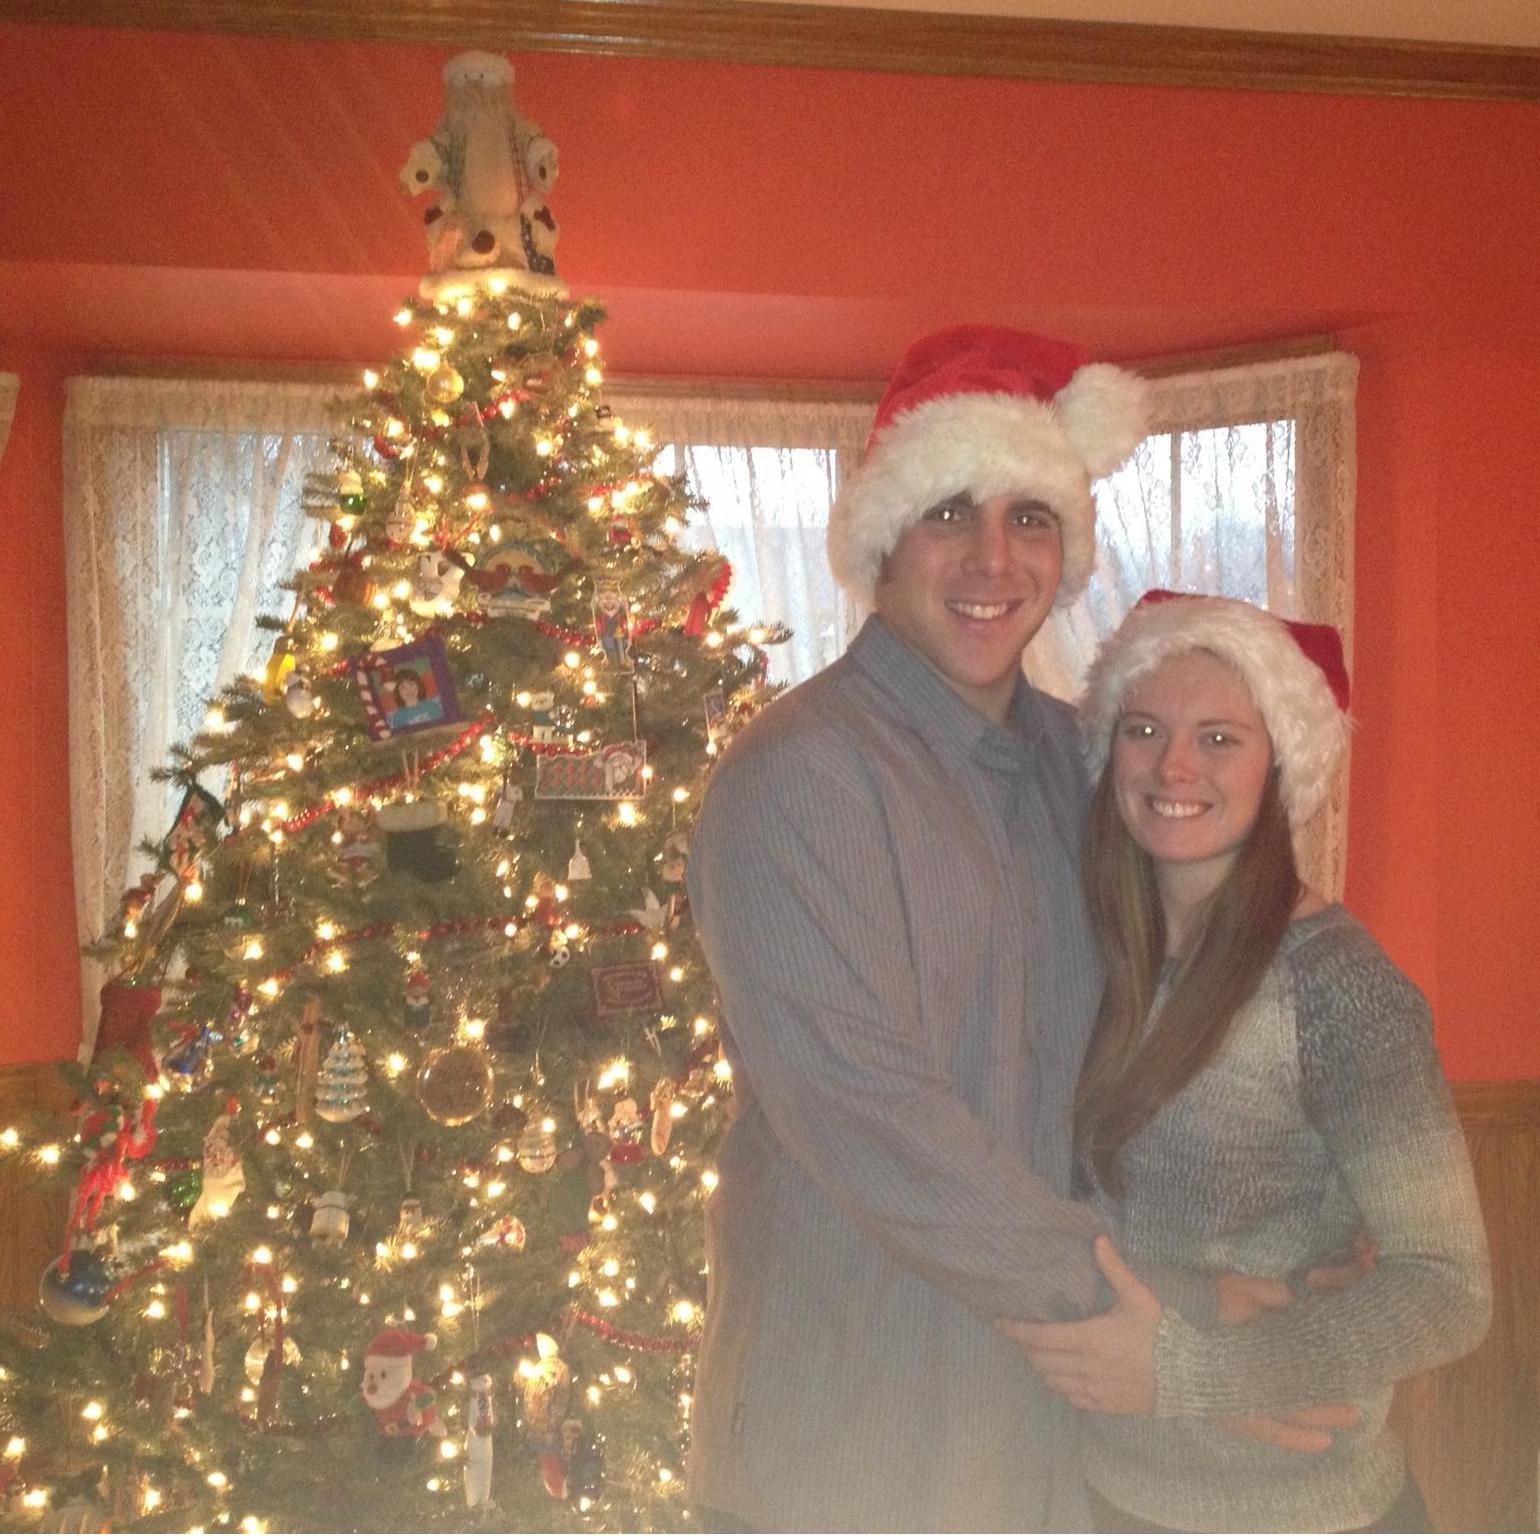 December 2013: Our first Christmas together!